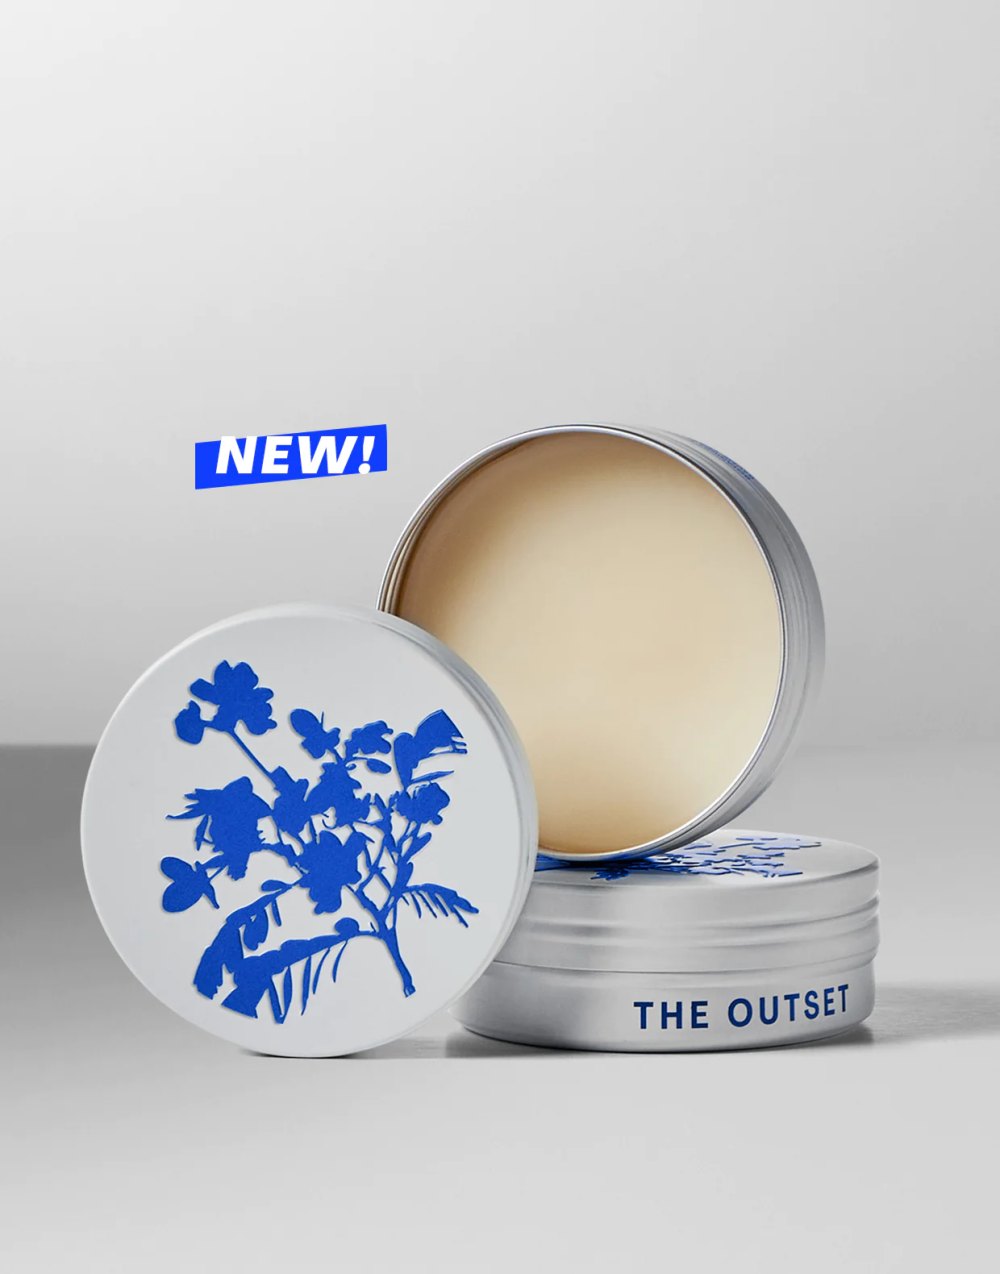 The Outset cream